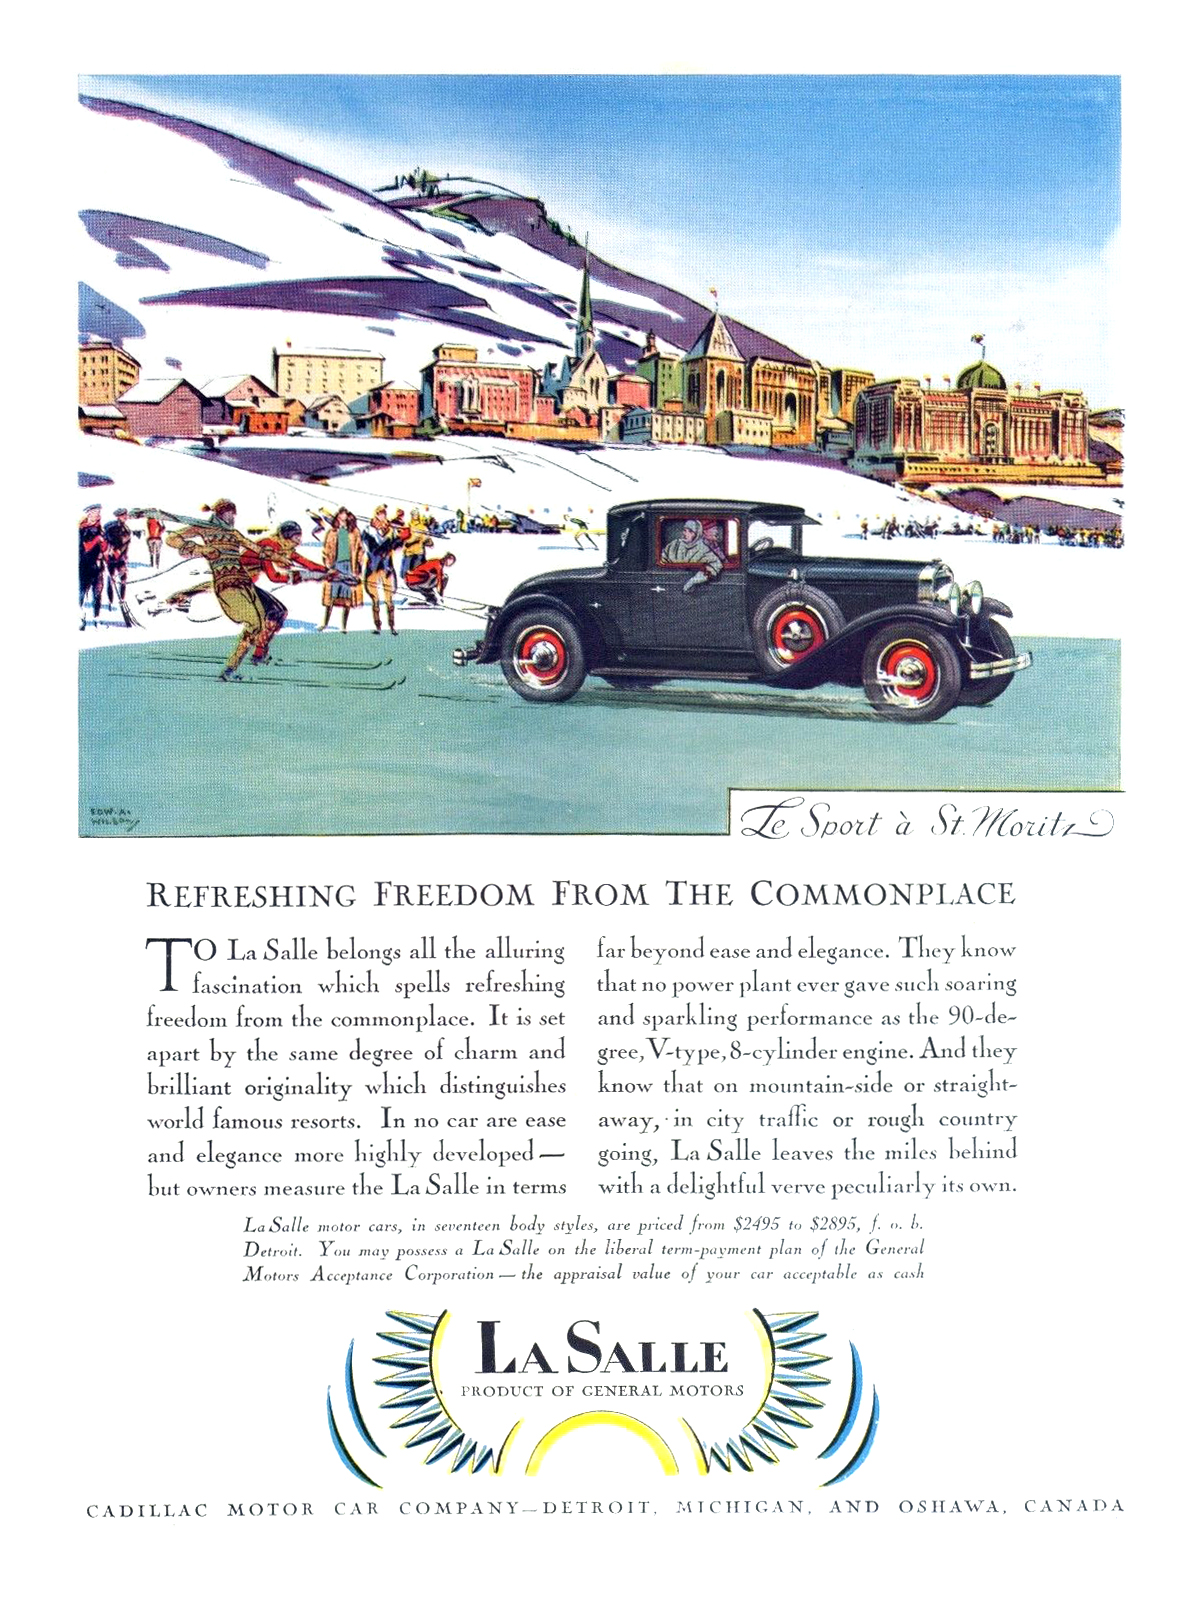 Cadillac/LaSalle Ad (January-February, 1928): Le Sport à St. Moritz - Illustrated by Edward A. Wilson